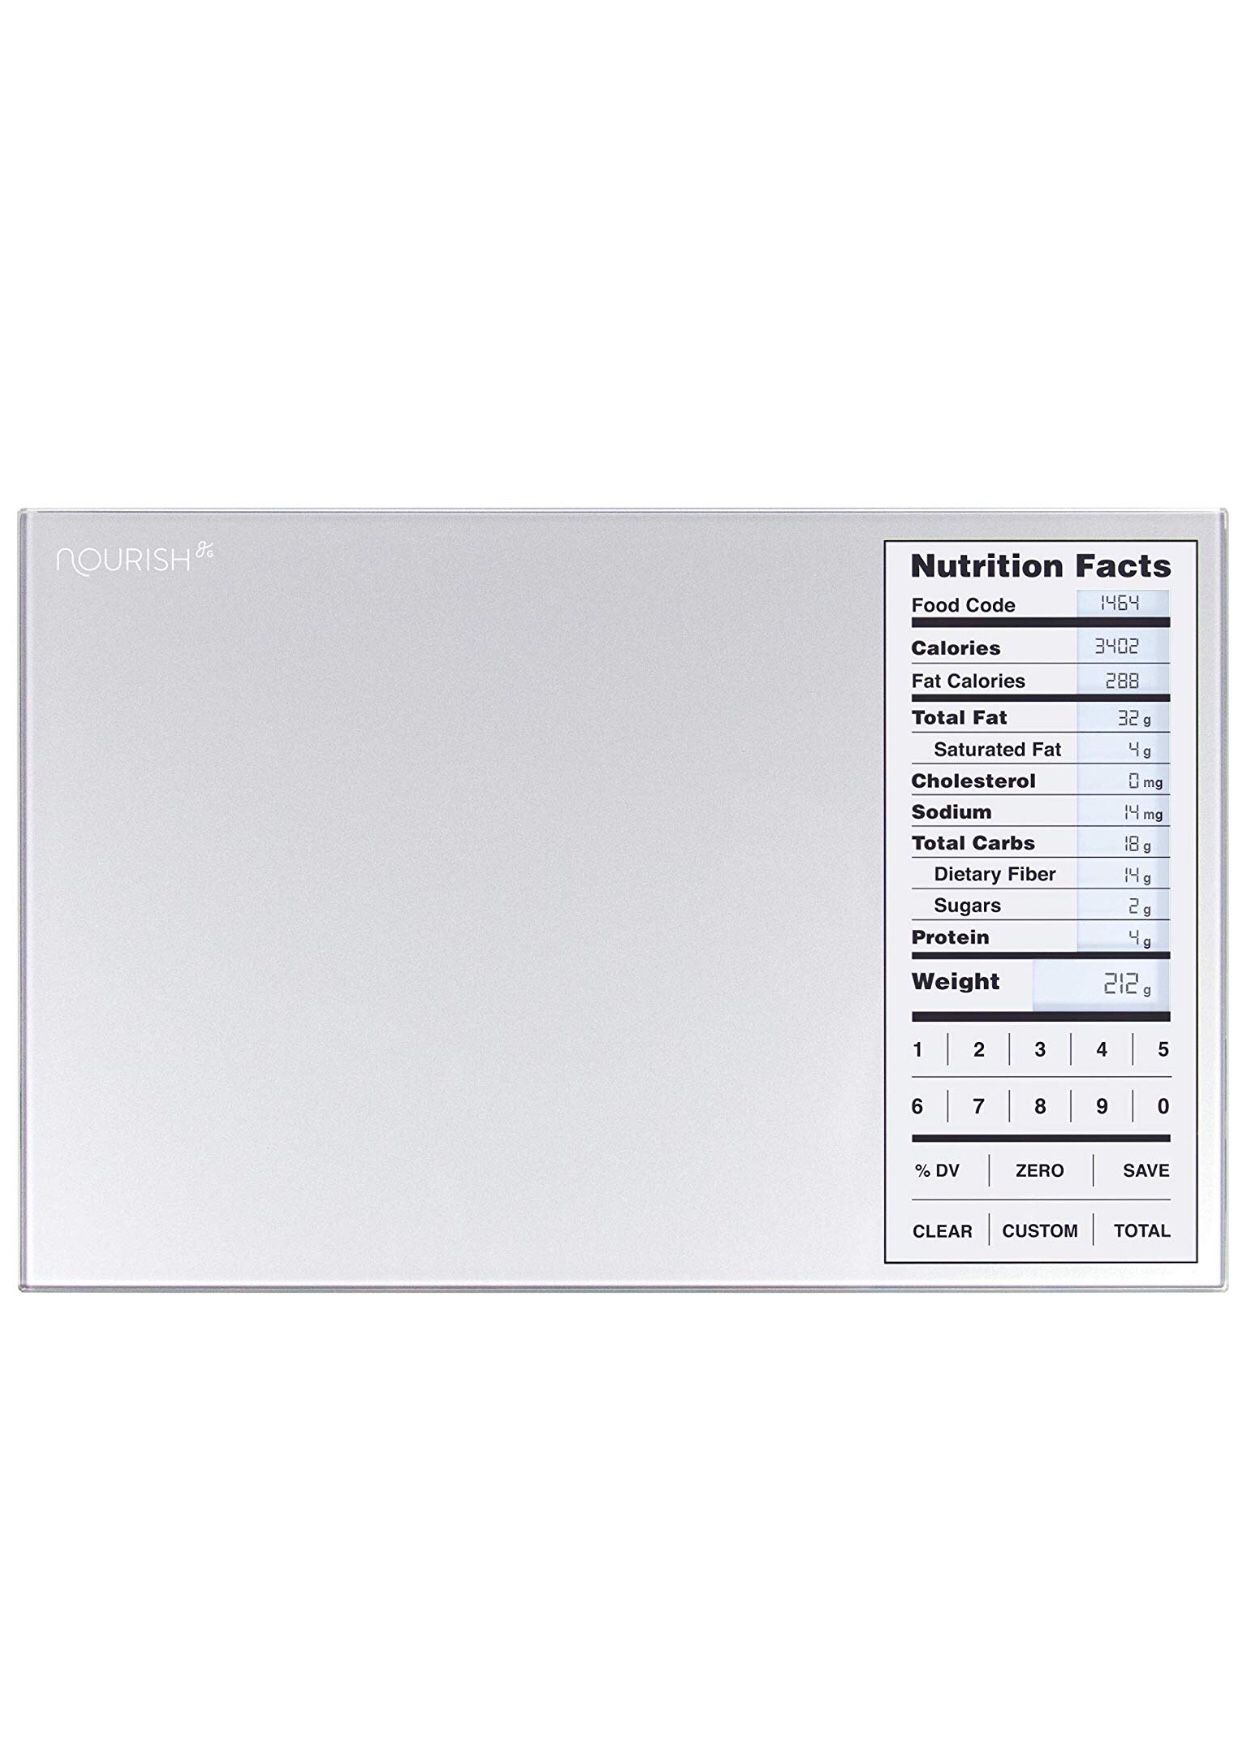 Nourish Digital Kitchen Scale, Food Scale with (New Backlit) Portions Nutritional Facts Display